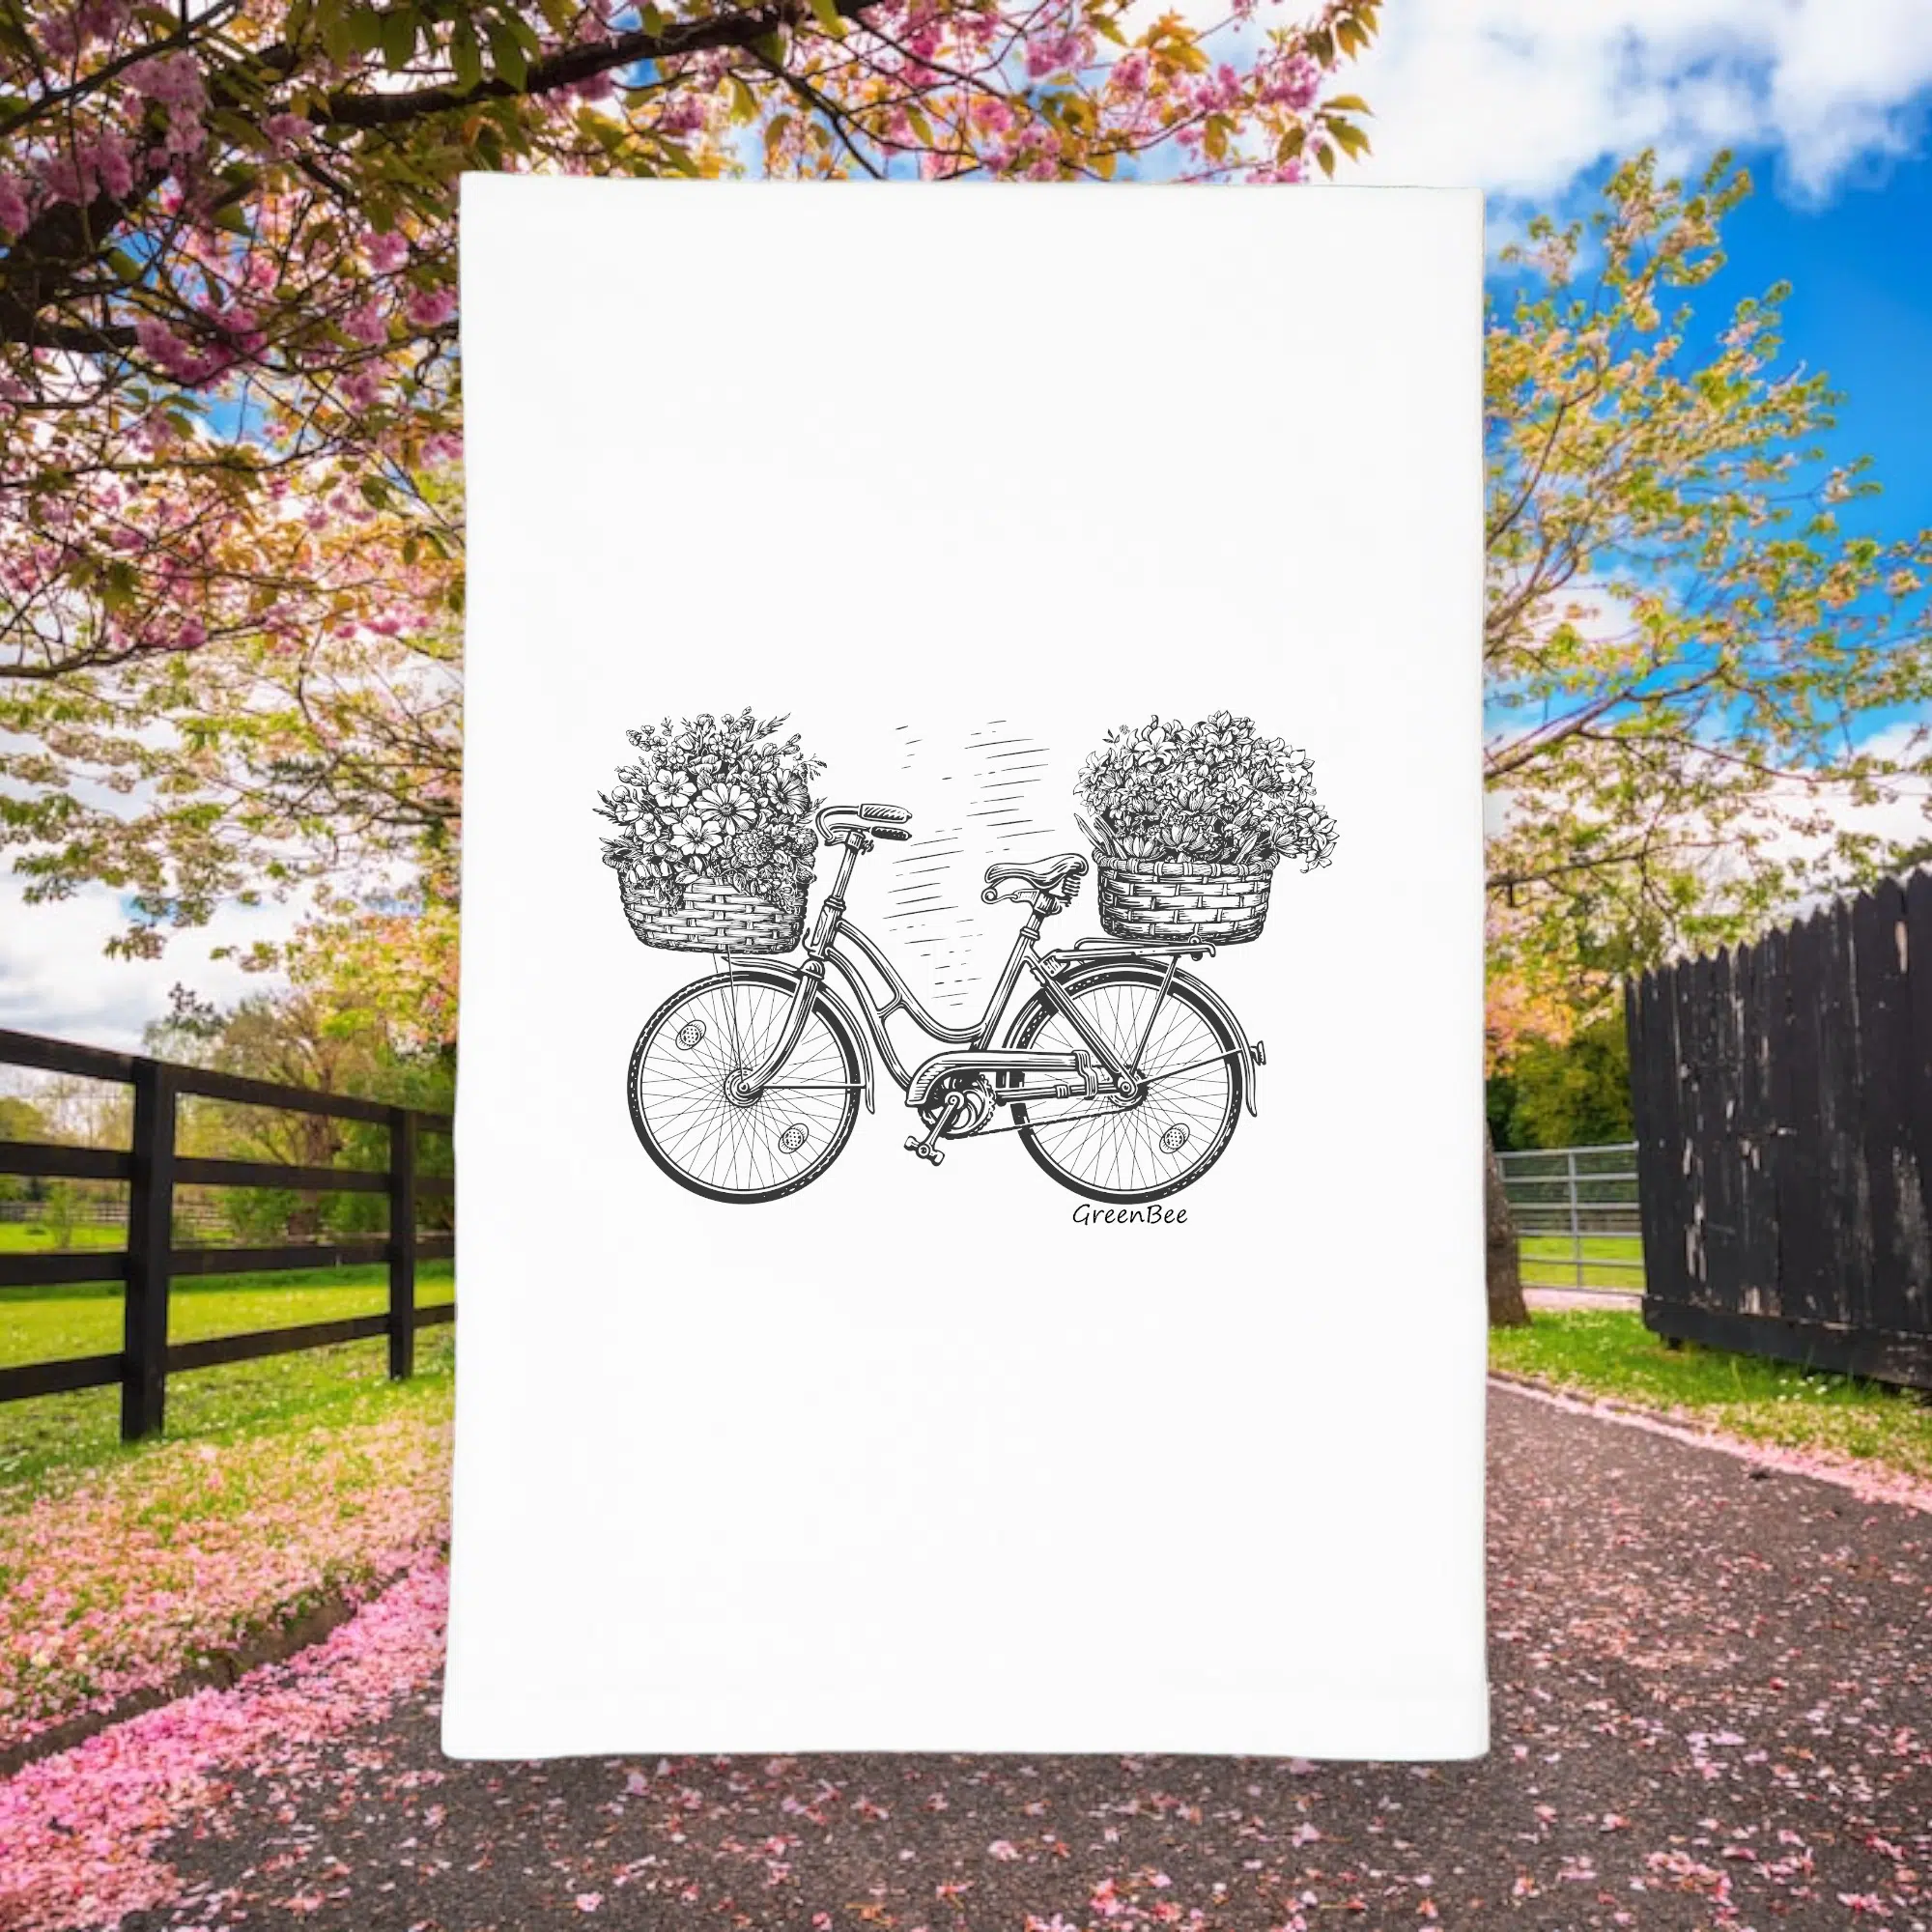 Ladies Bicycle With Baskets of Flower on the From and Back